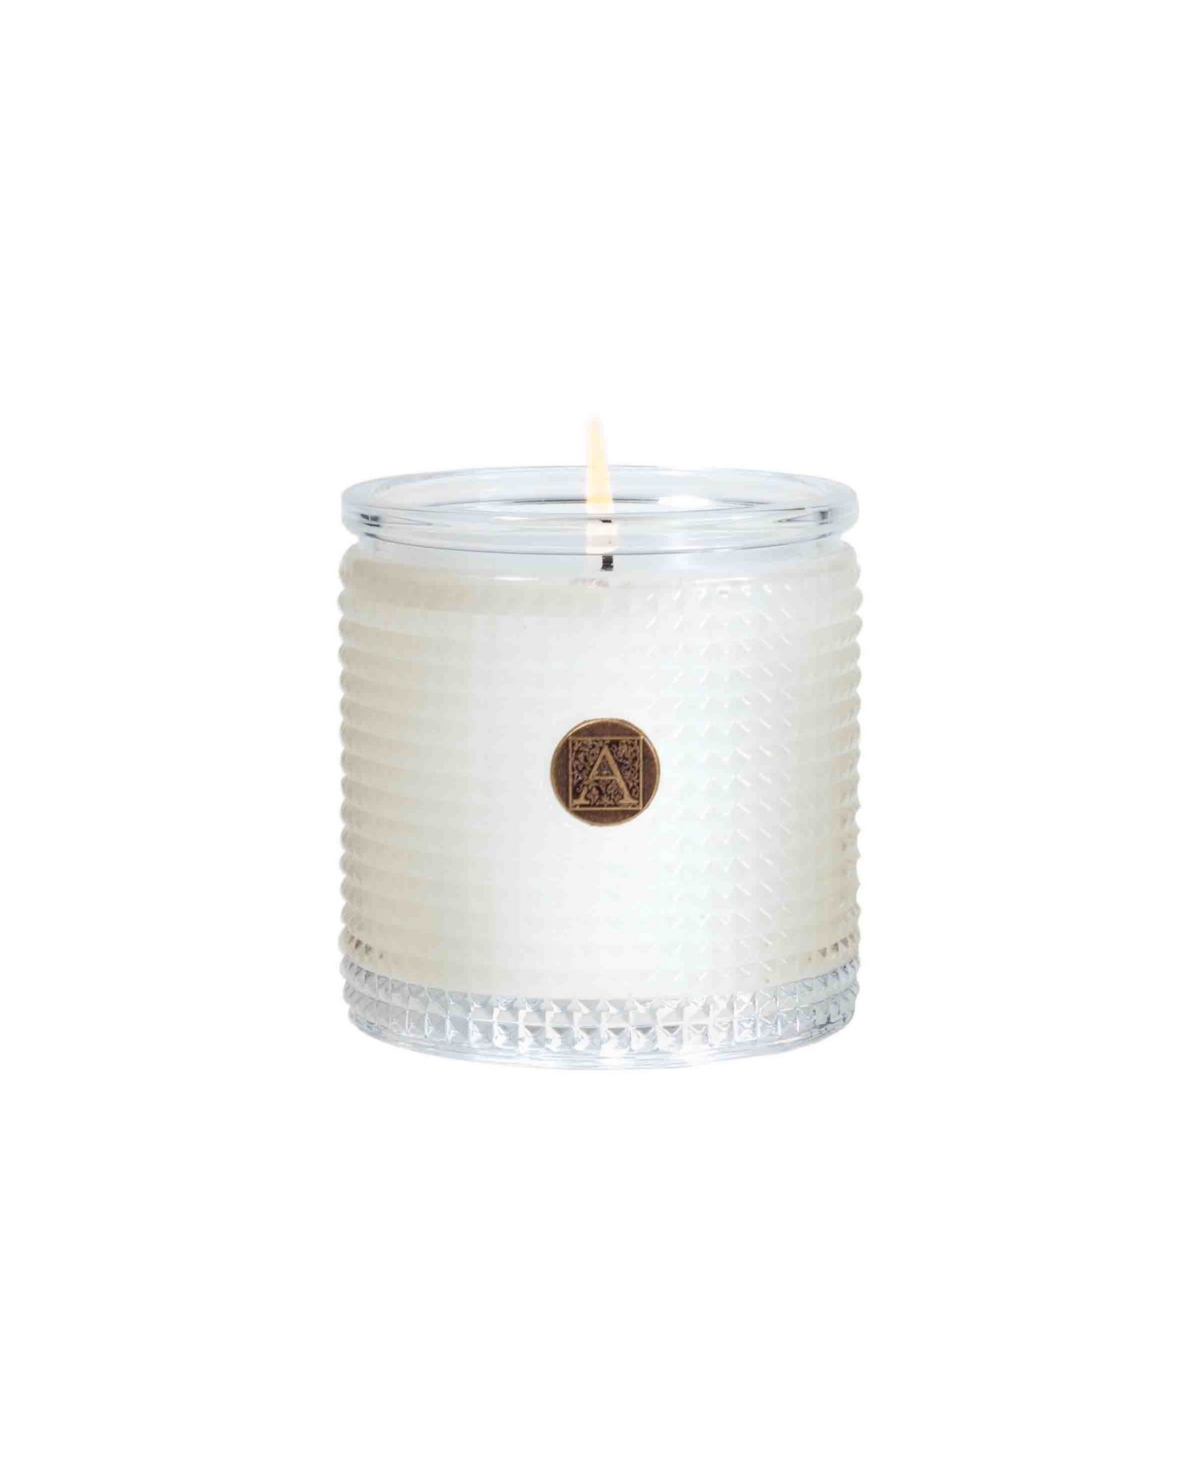 Aromatique Gingerbread Brulee Textured Glass Candle